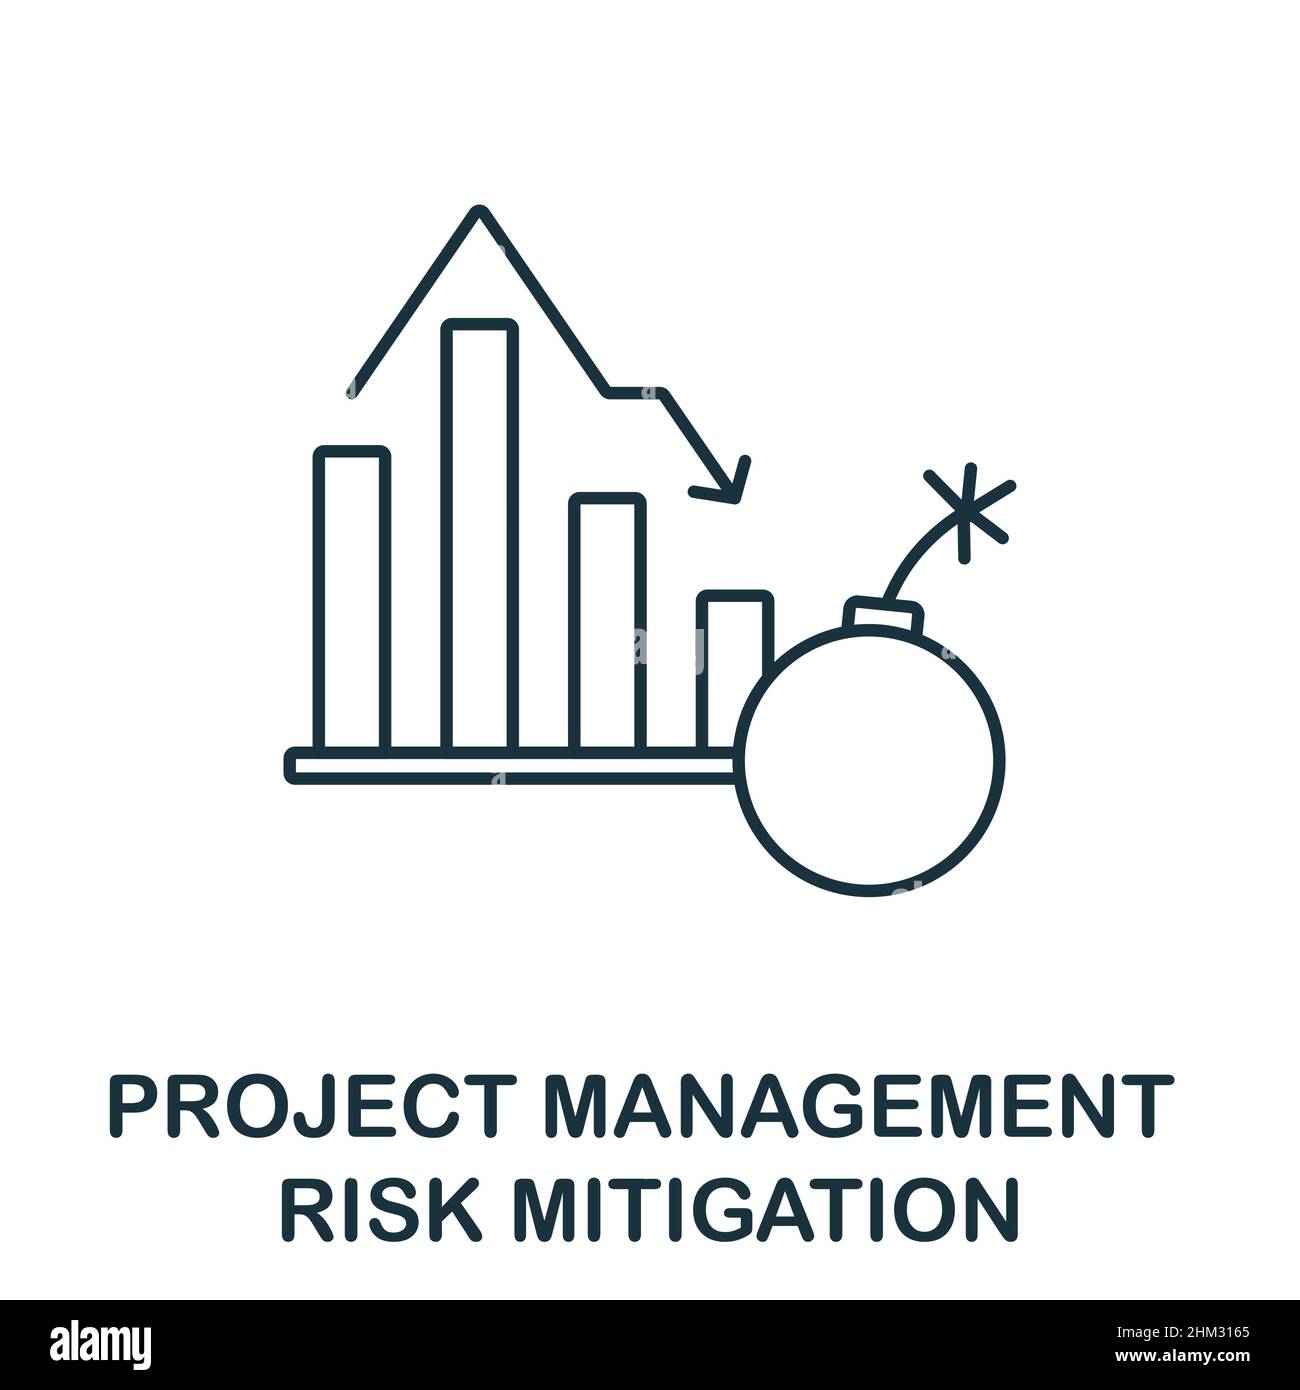 Risk Mitigation icon. Line element from project management collection. Linear Risk Mitigation icon sign for web design, infographics and more. Stock Vector